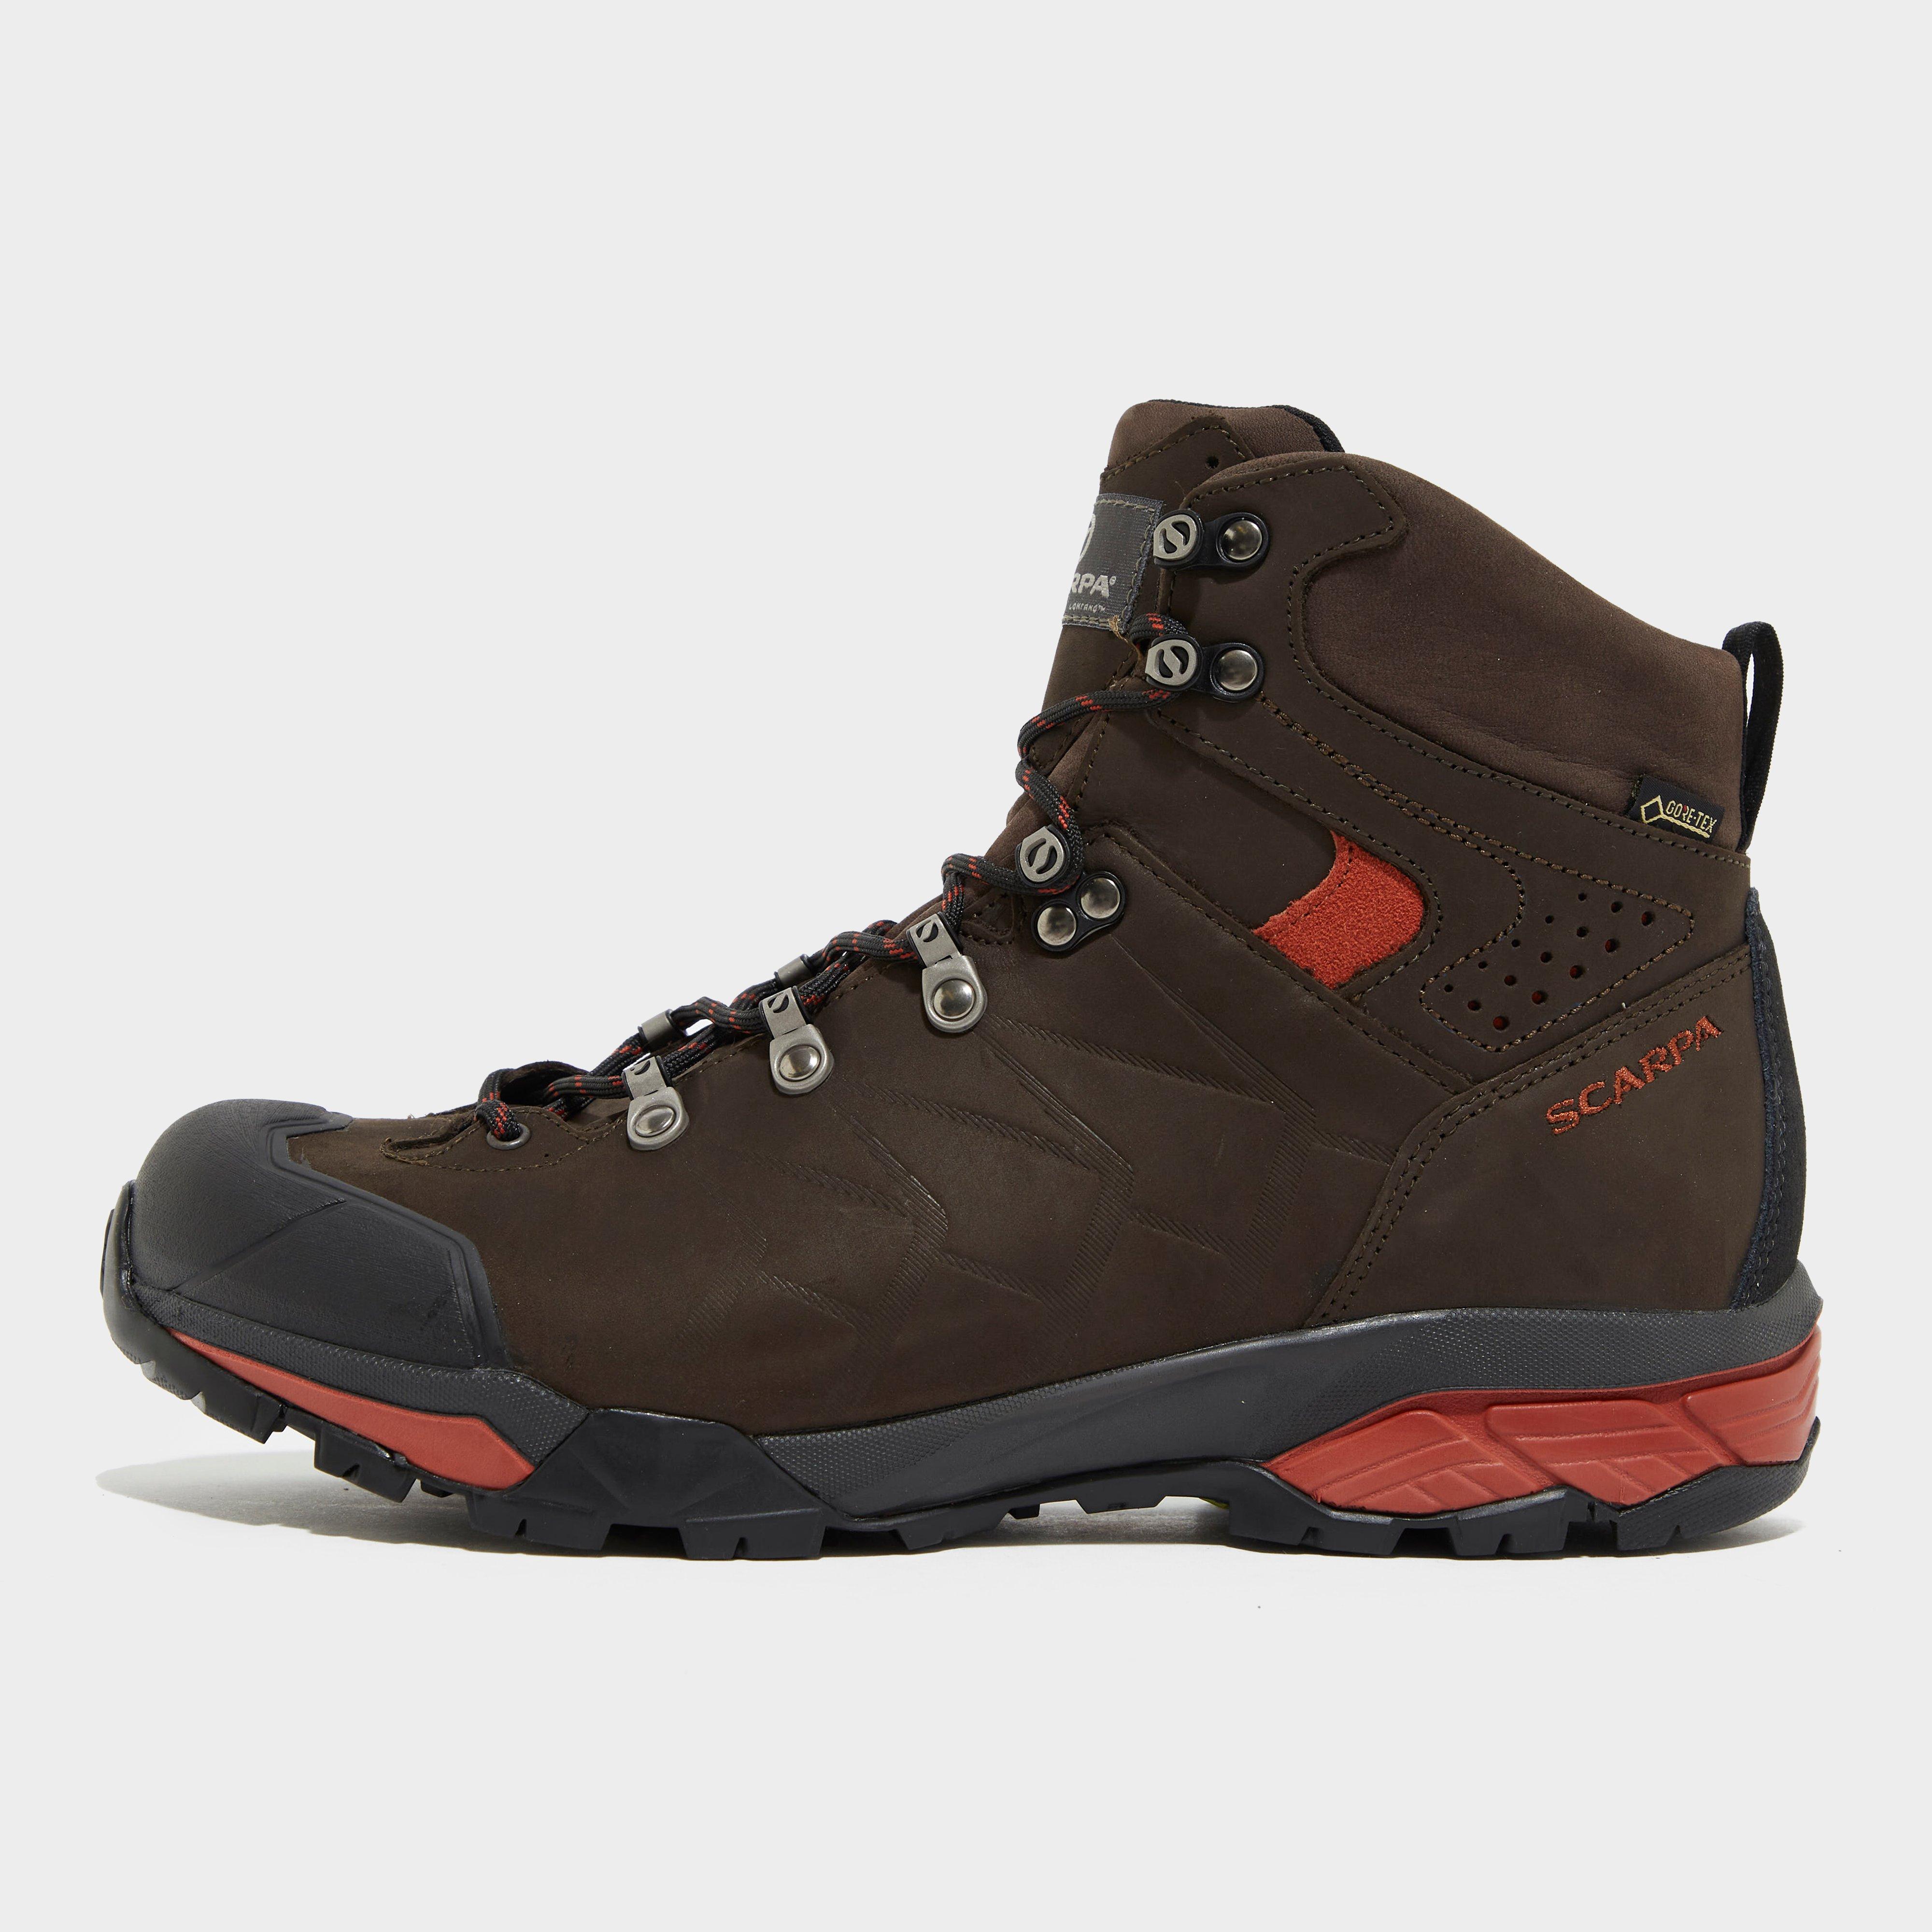 walking boots at go outdoors